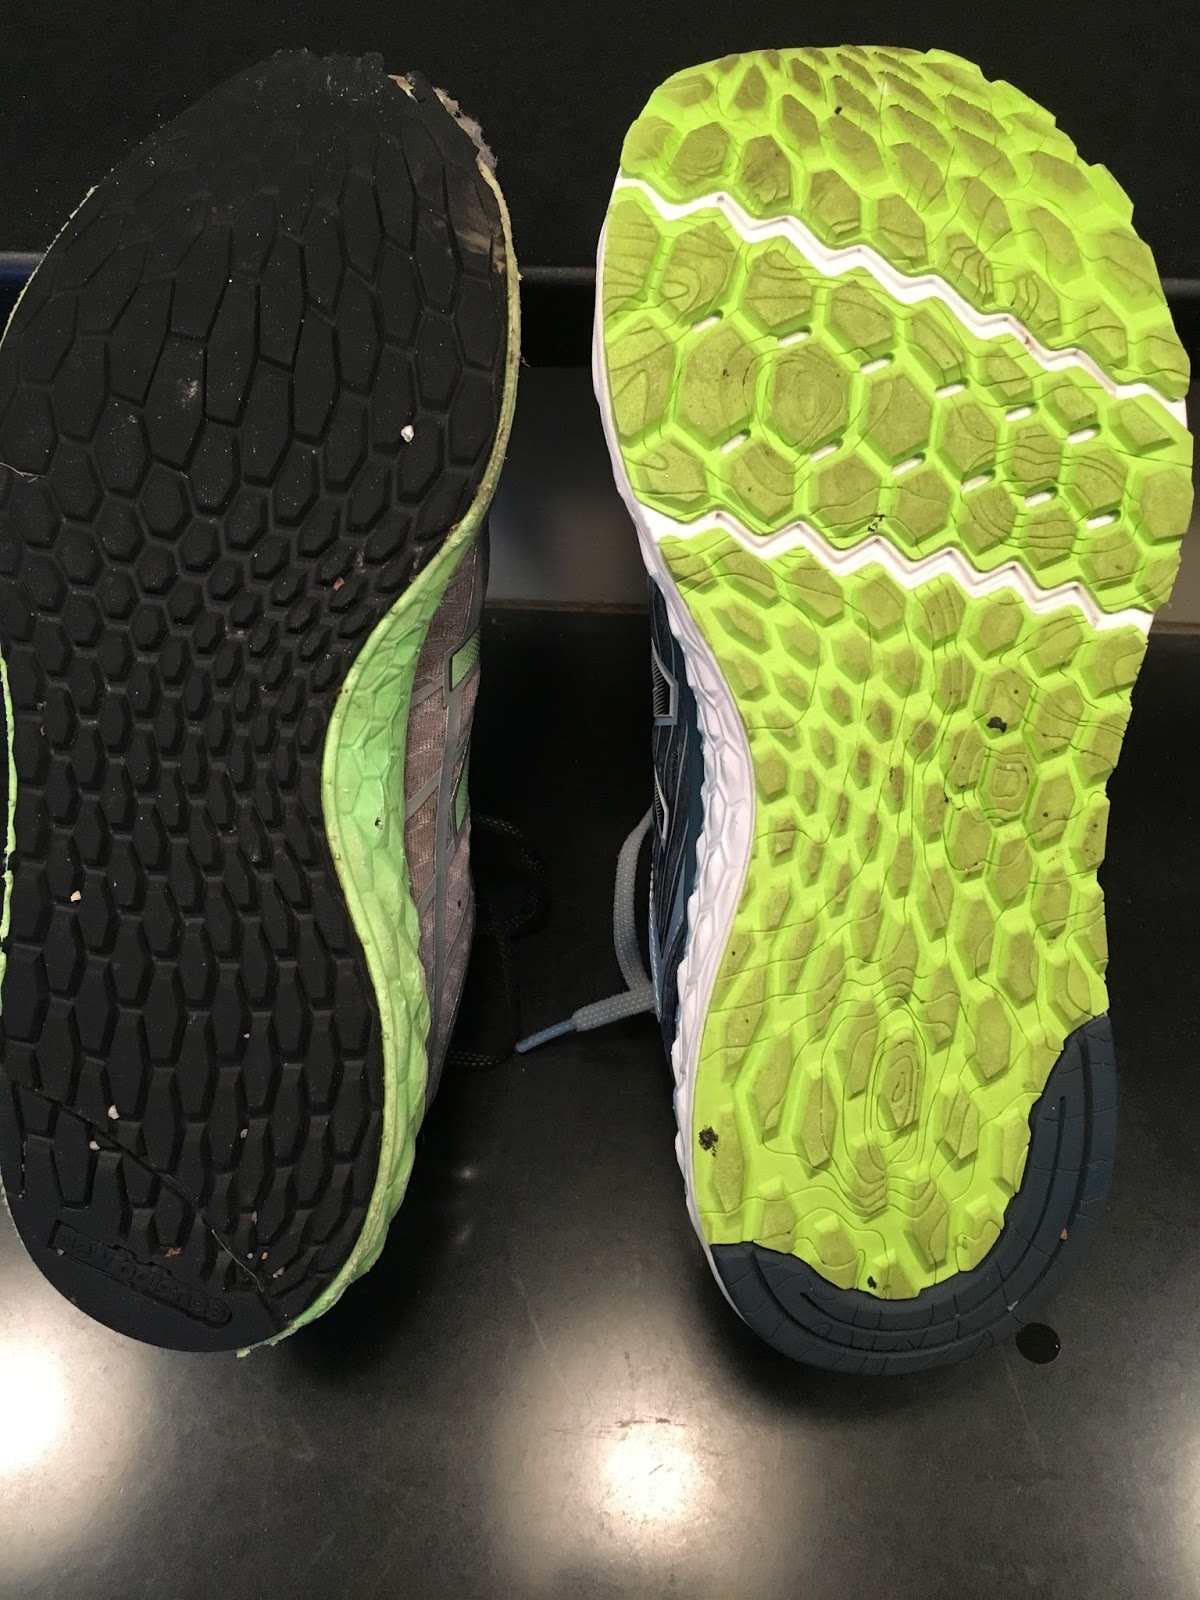 Road Trail Review- New Fresh Foam A Softer, Smoother Premium Ride Comes to Fresh Foam